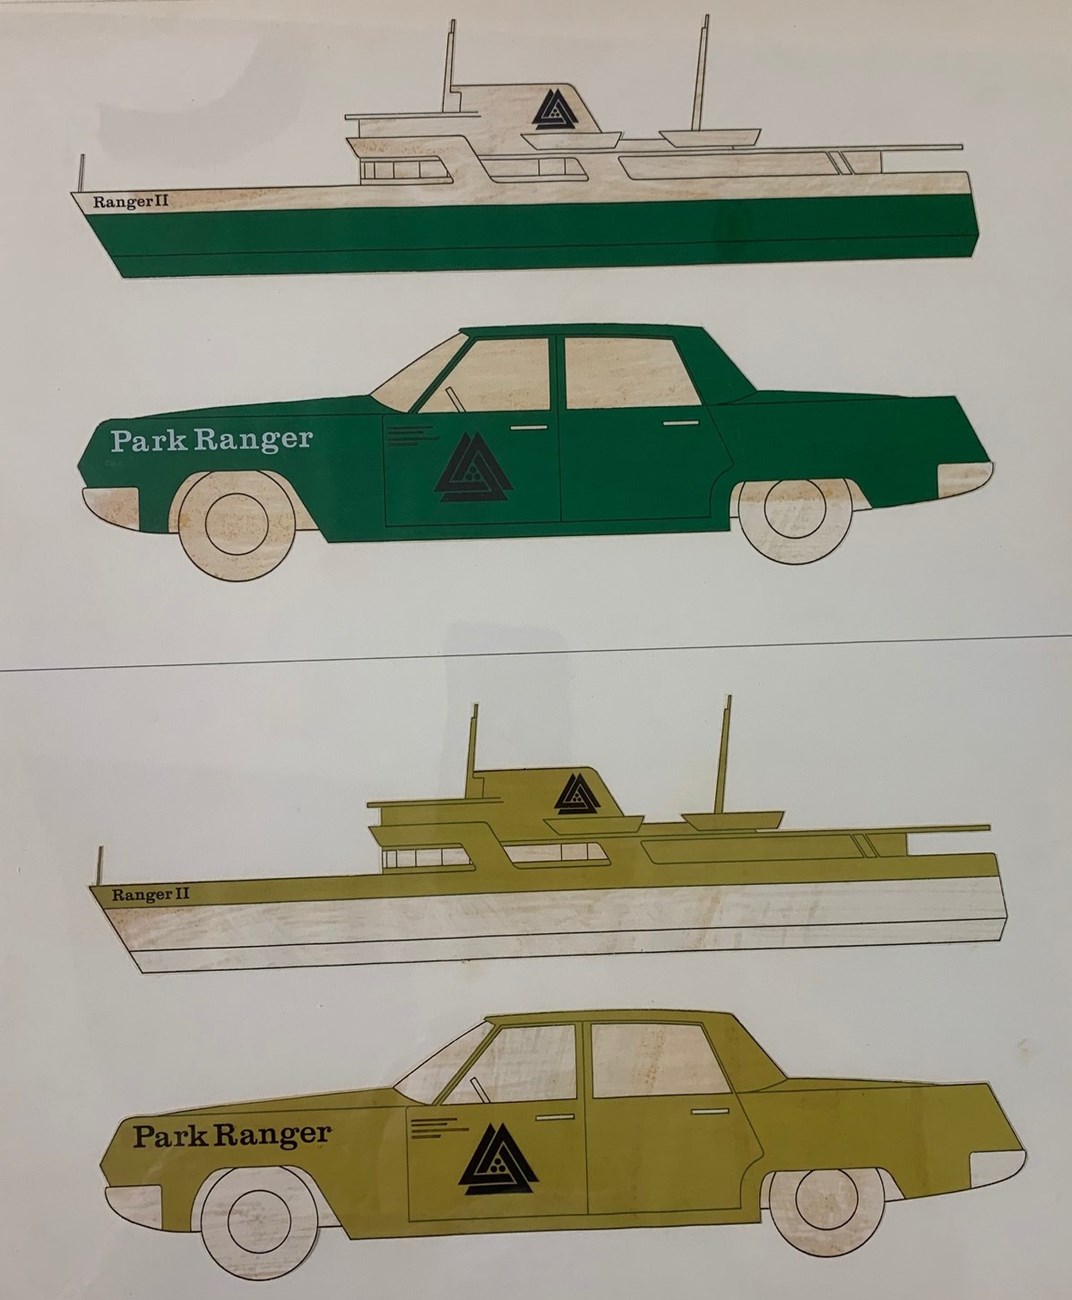 Drawing with two green and two yellow cars and boats